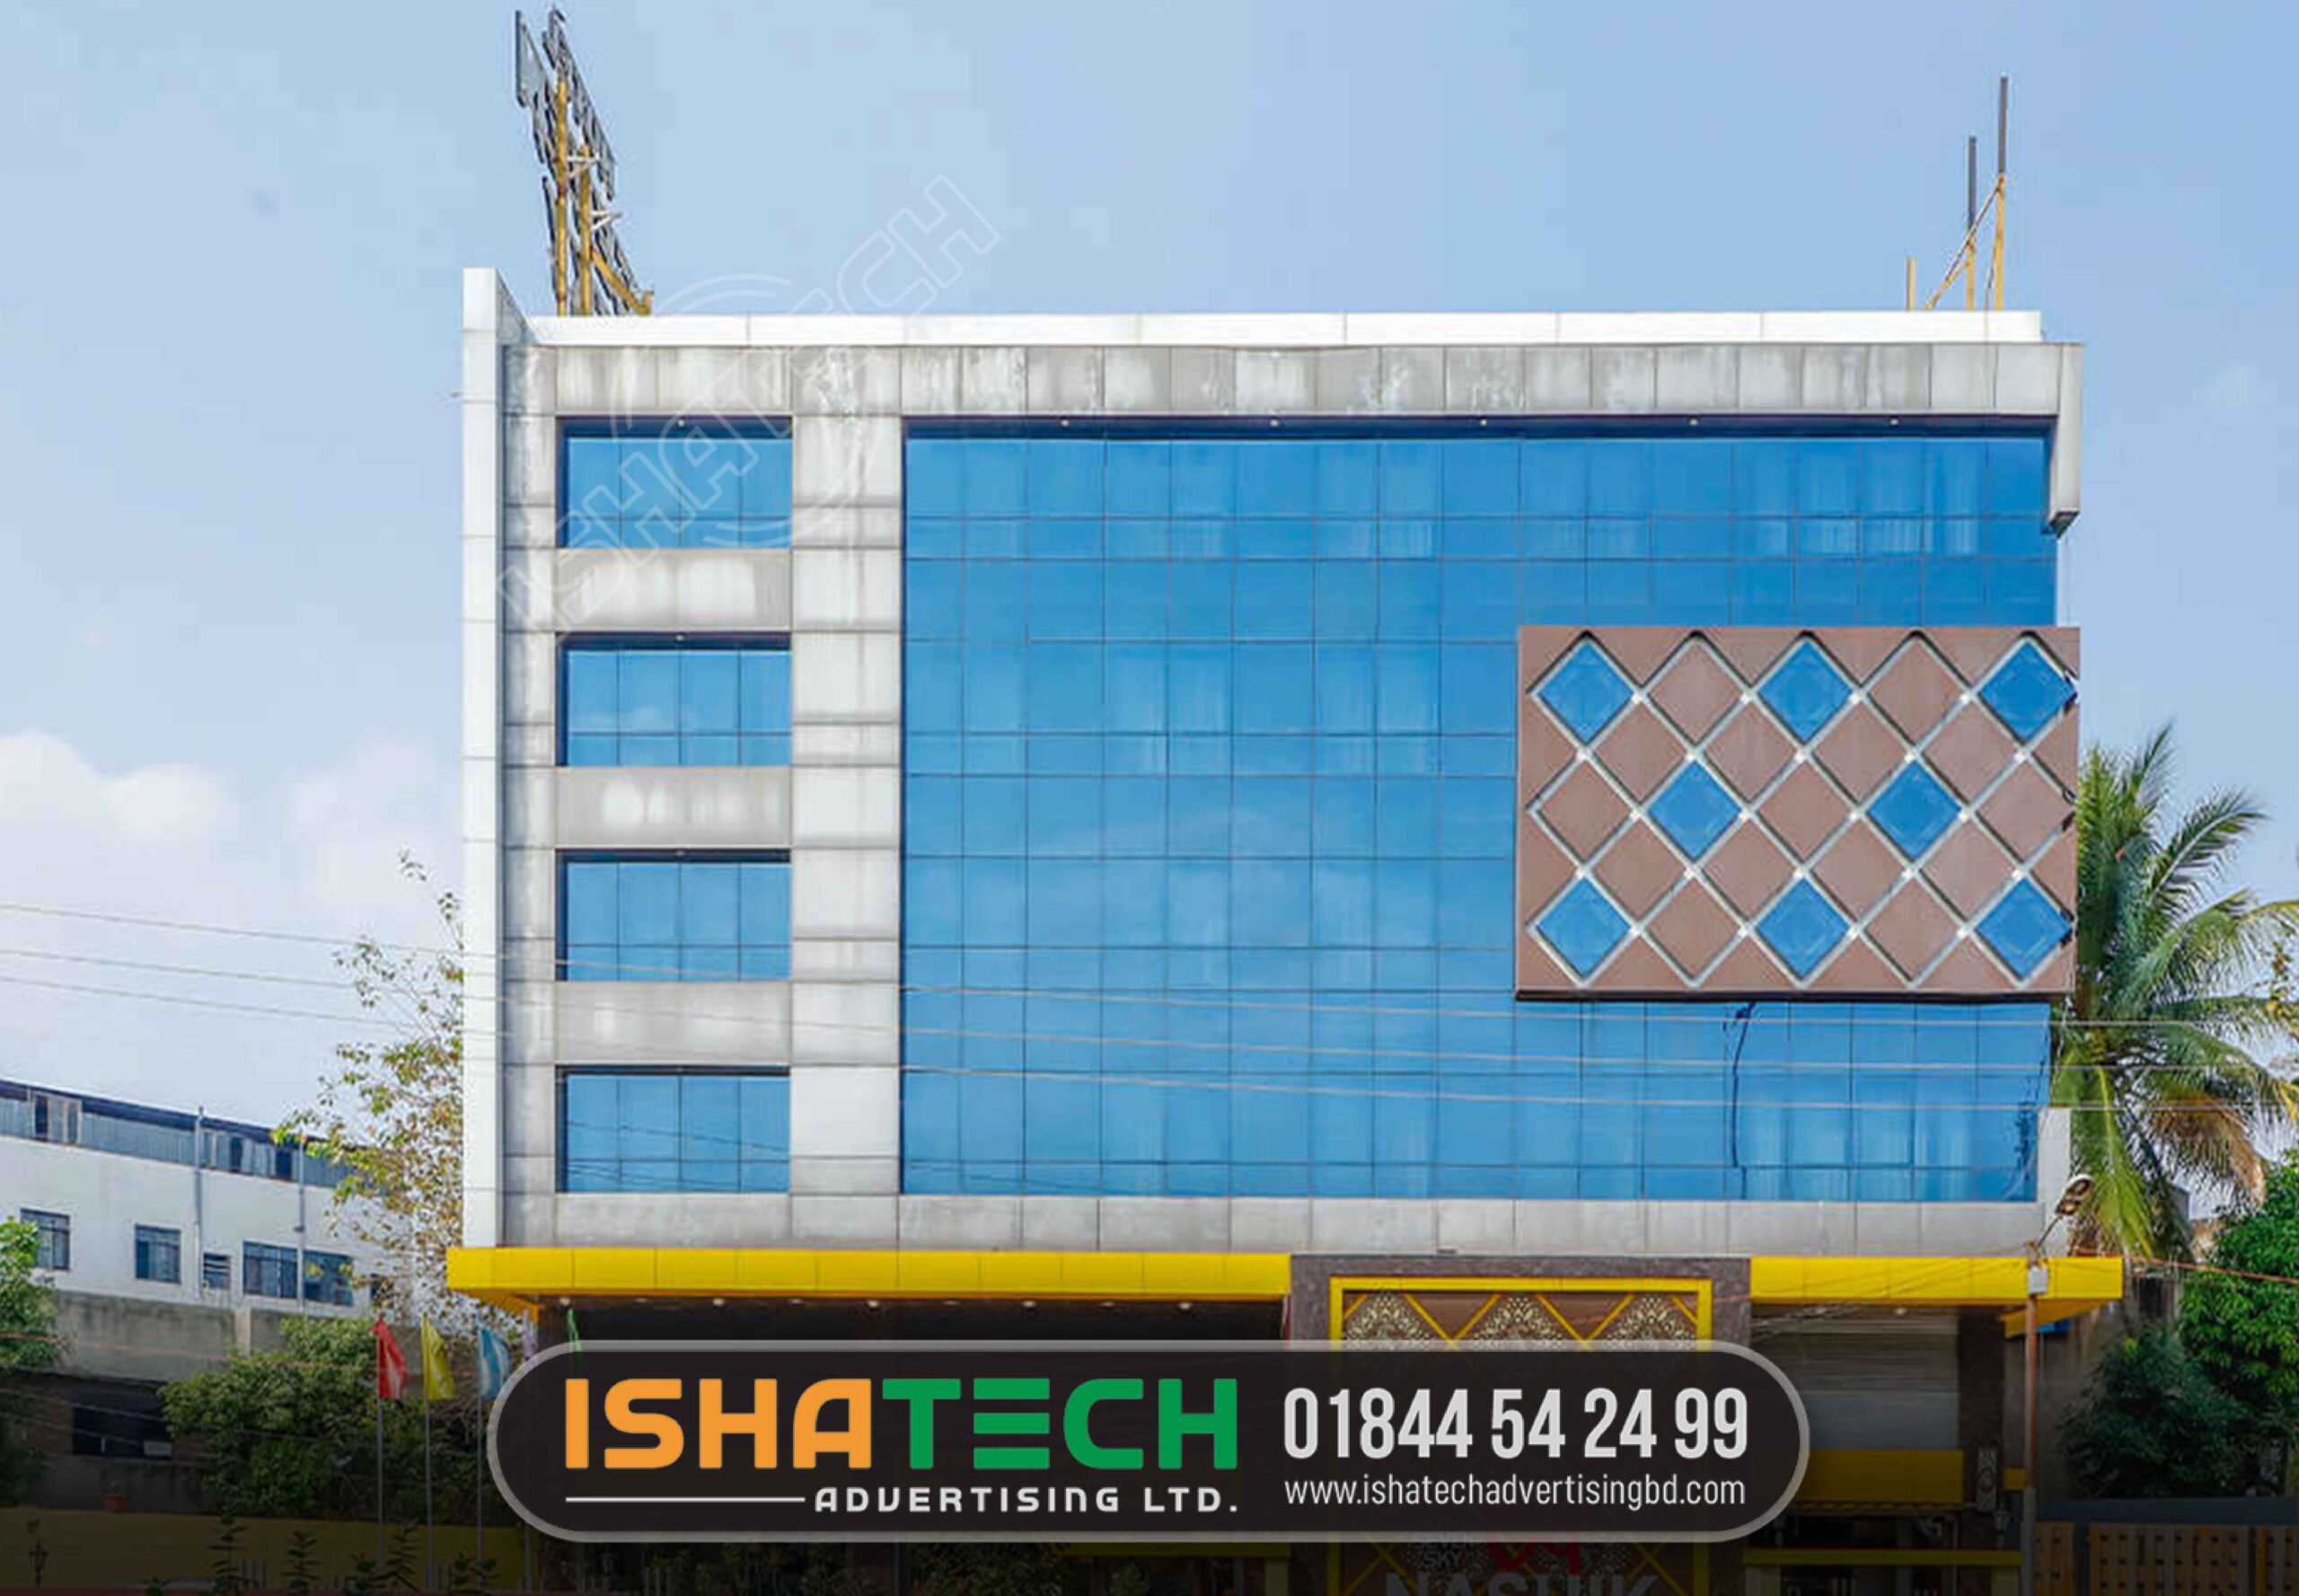 Profile Signboard SS & Acrylic Letter Signage in Bangladesh. Alco Offcutting panel Offcuttin Sign Board in Bangladesh